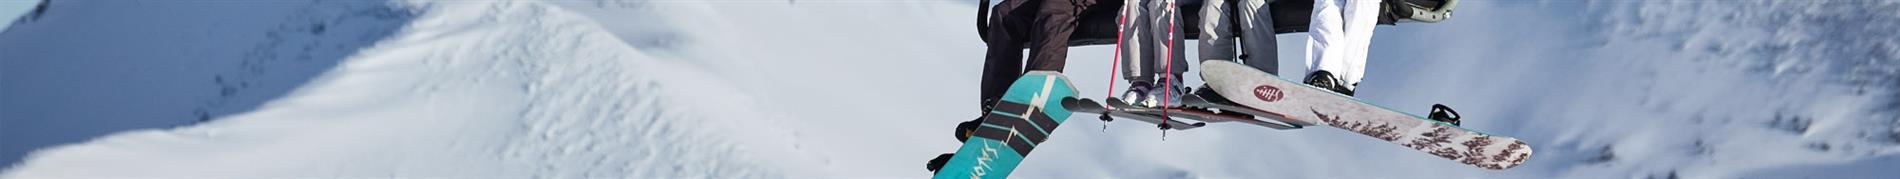 Gnu Women's skis, snowboards, and accessories for everything snow. 